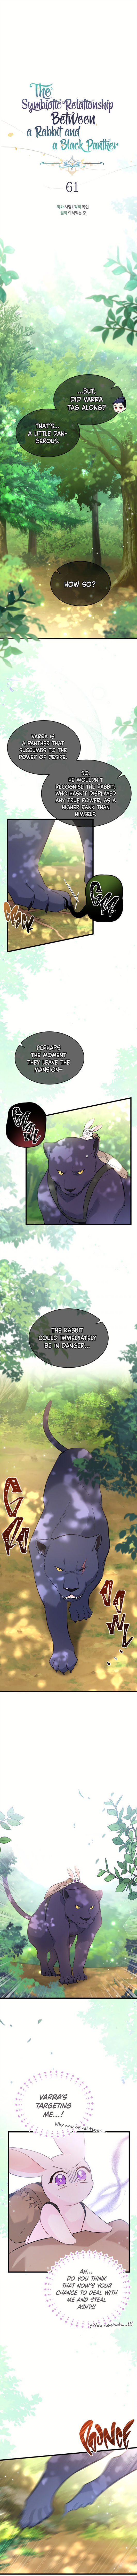 The Symbiotic Relationship Between A Rabbit and A Black Panther - Chapter 61 Page 4